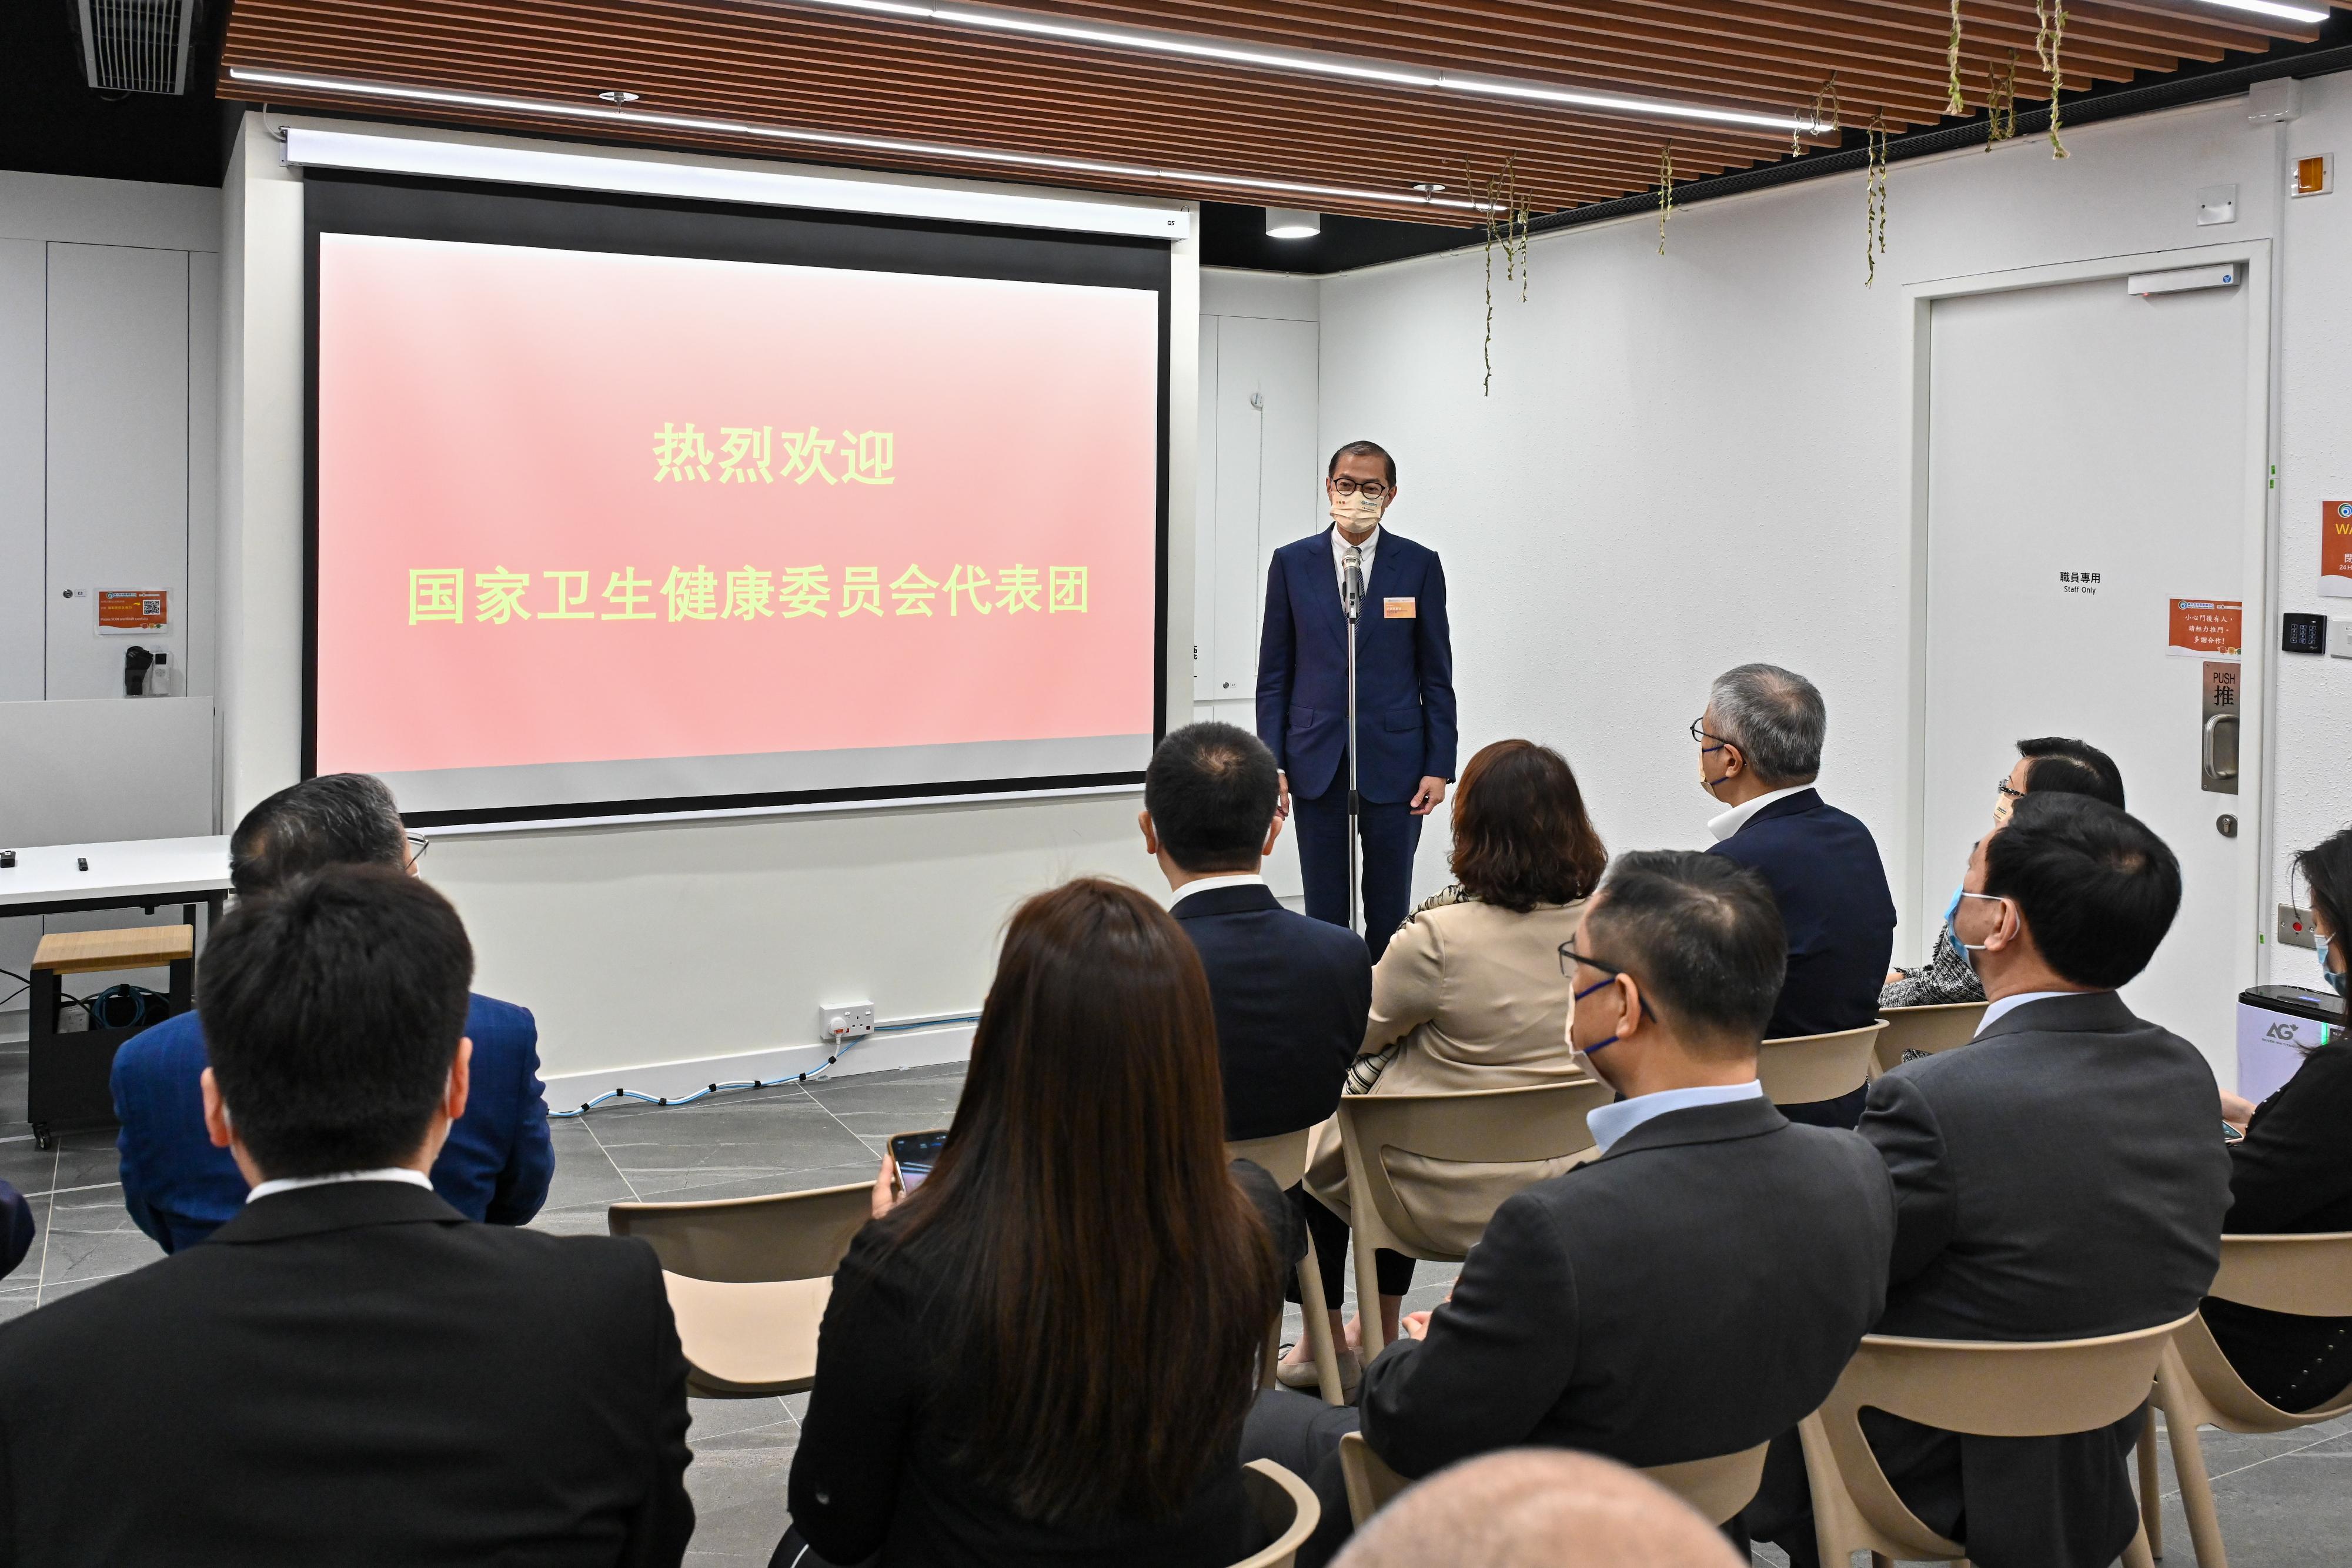 The Secretary for Health, Professor Lo Chung-mau, welcomed the National Health Commission delegation to visit the Wong Tai Sin District Health Centre today (March 28). Photo shows Professor Lo delivering his welcome remarks during the visit.